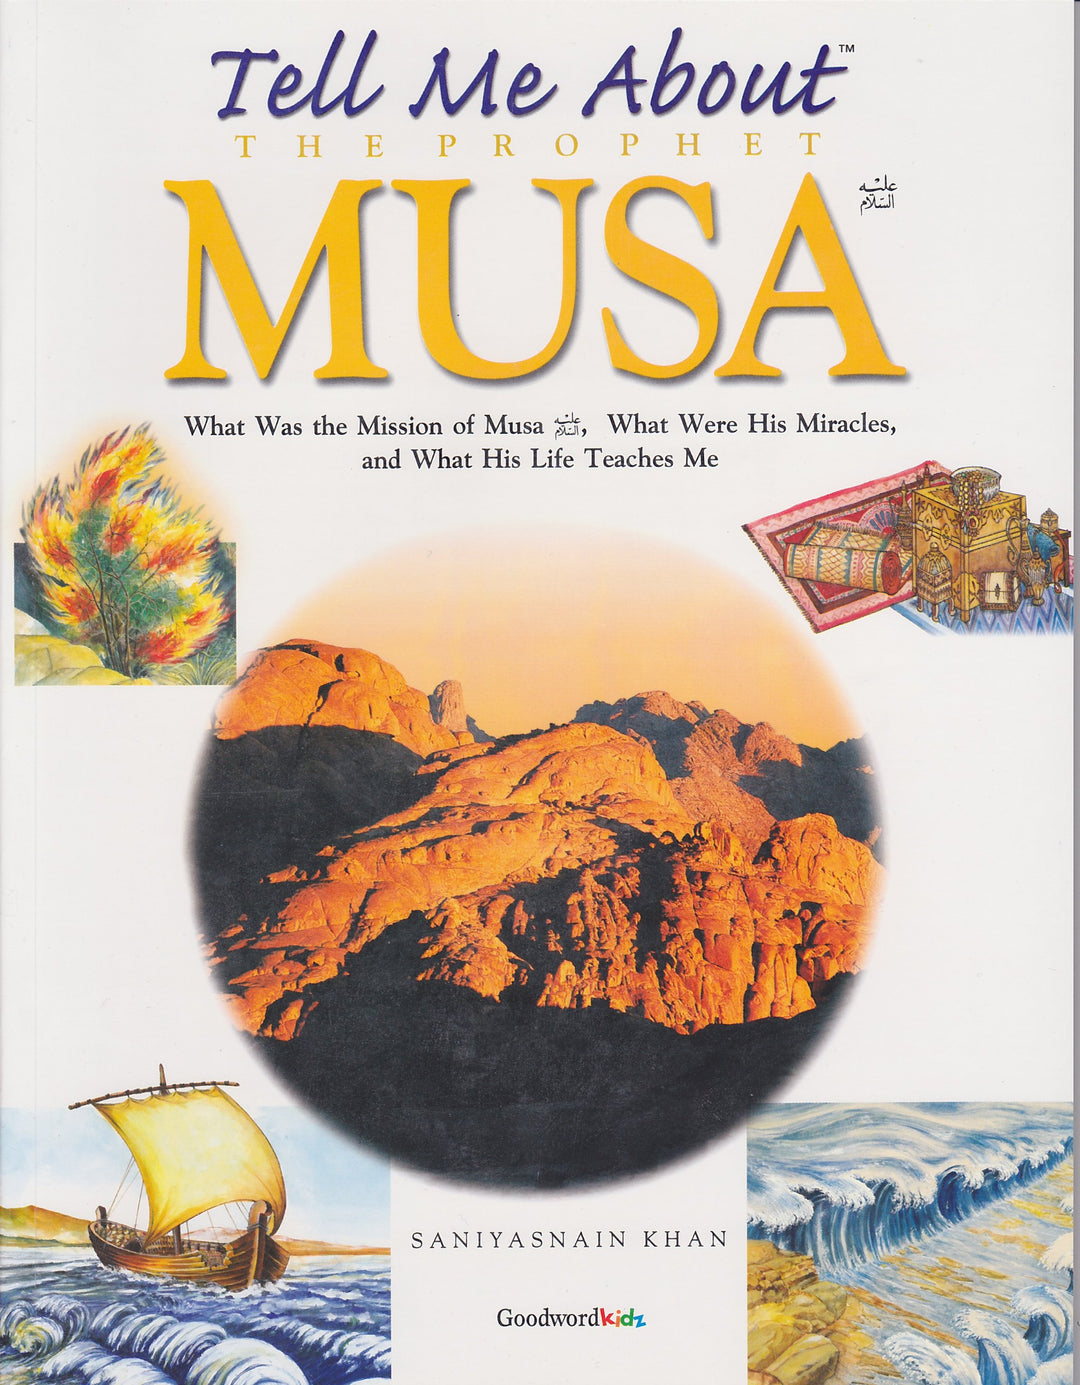 Tell Me About the Prophet Musa (AS)